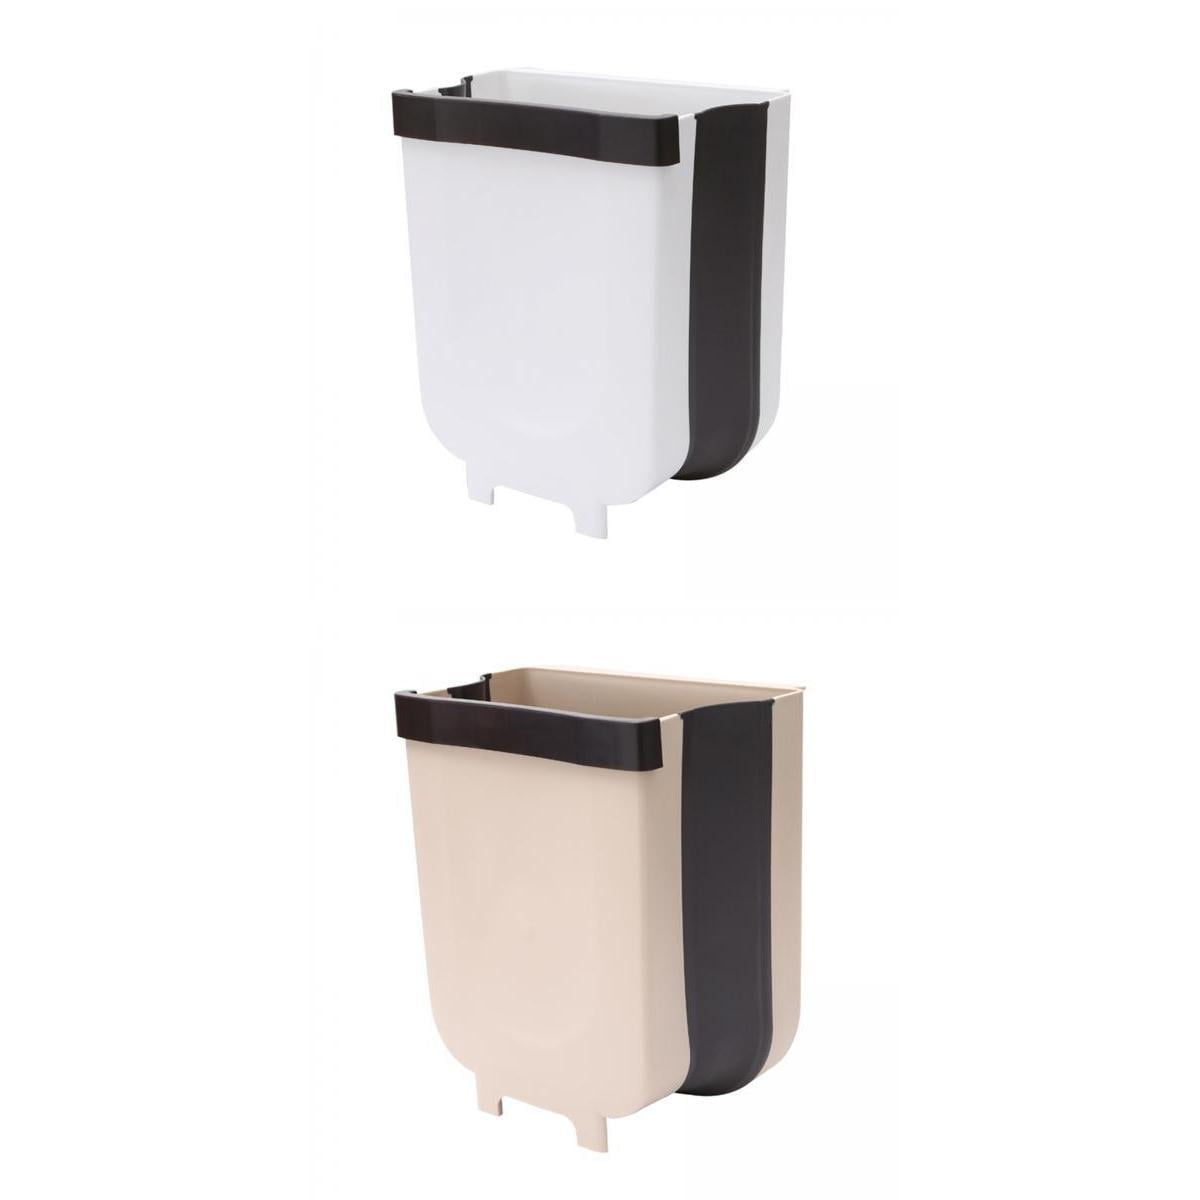 Coffee-2Pcs 2 PCS Hanging Trash Bins,Large Capacity Folding Kitchen Waste Bin for Collecting Vegetable Peels,Cabinets Trash Can for Storing Small Kitchen Tools 